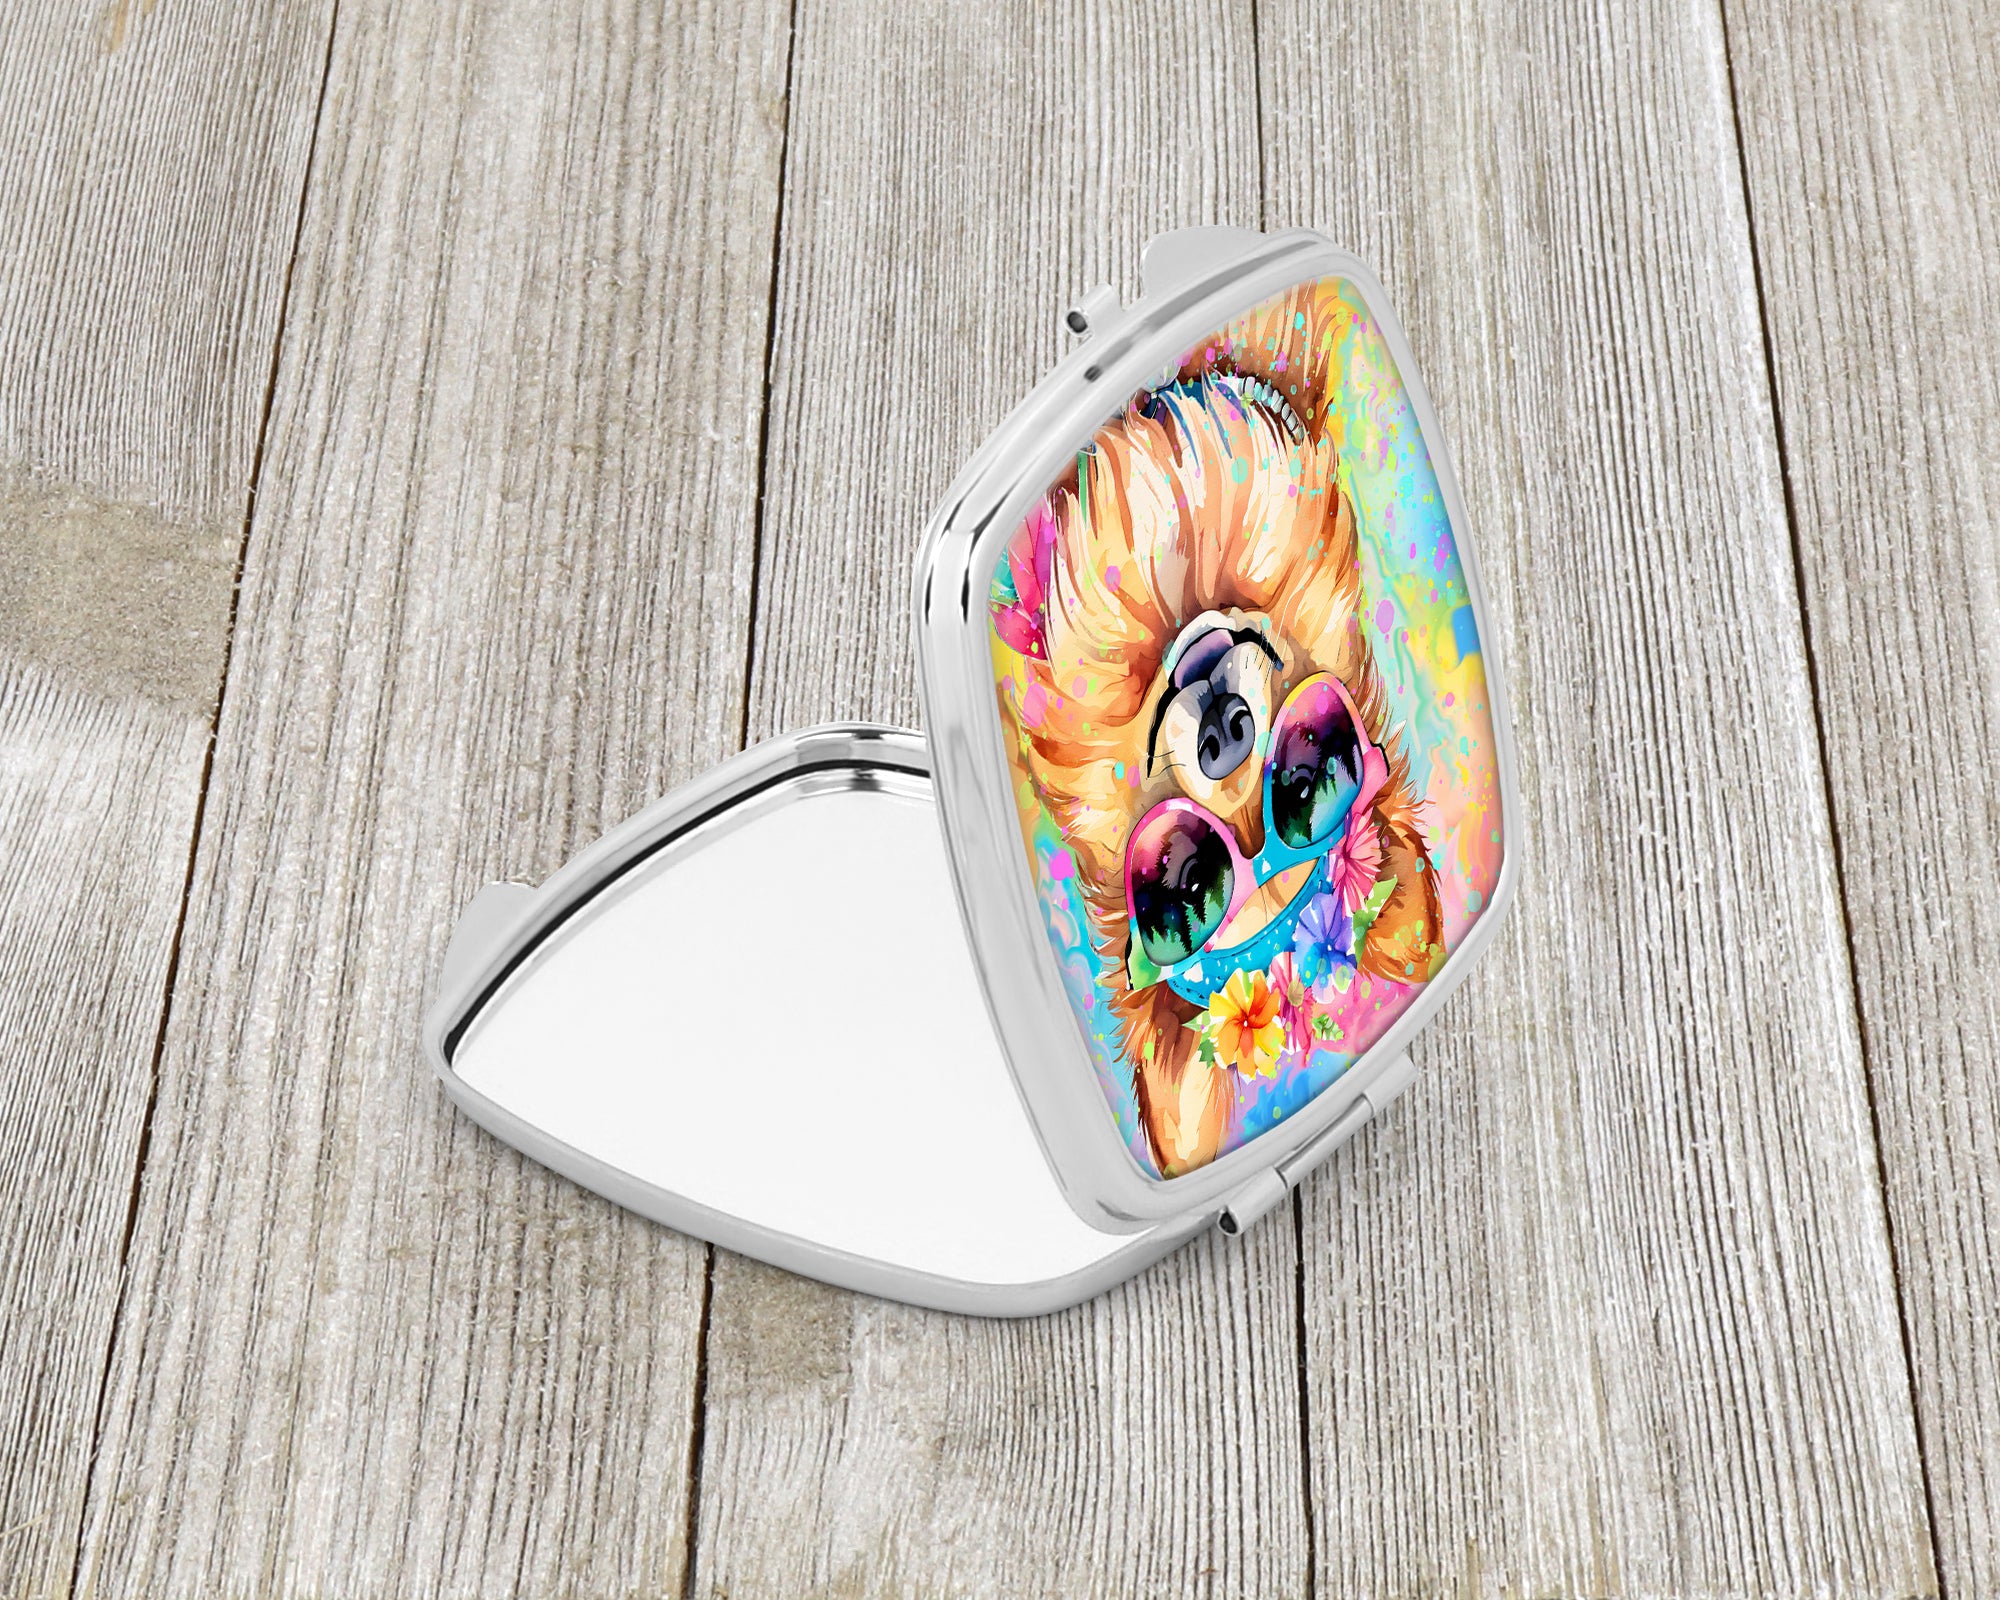 Buy this Pomeranian Hippie Dawg Compact Mirror